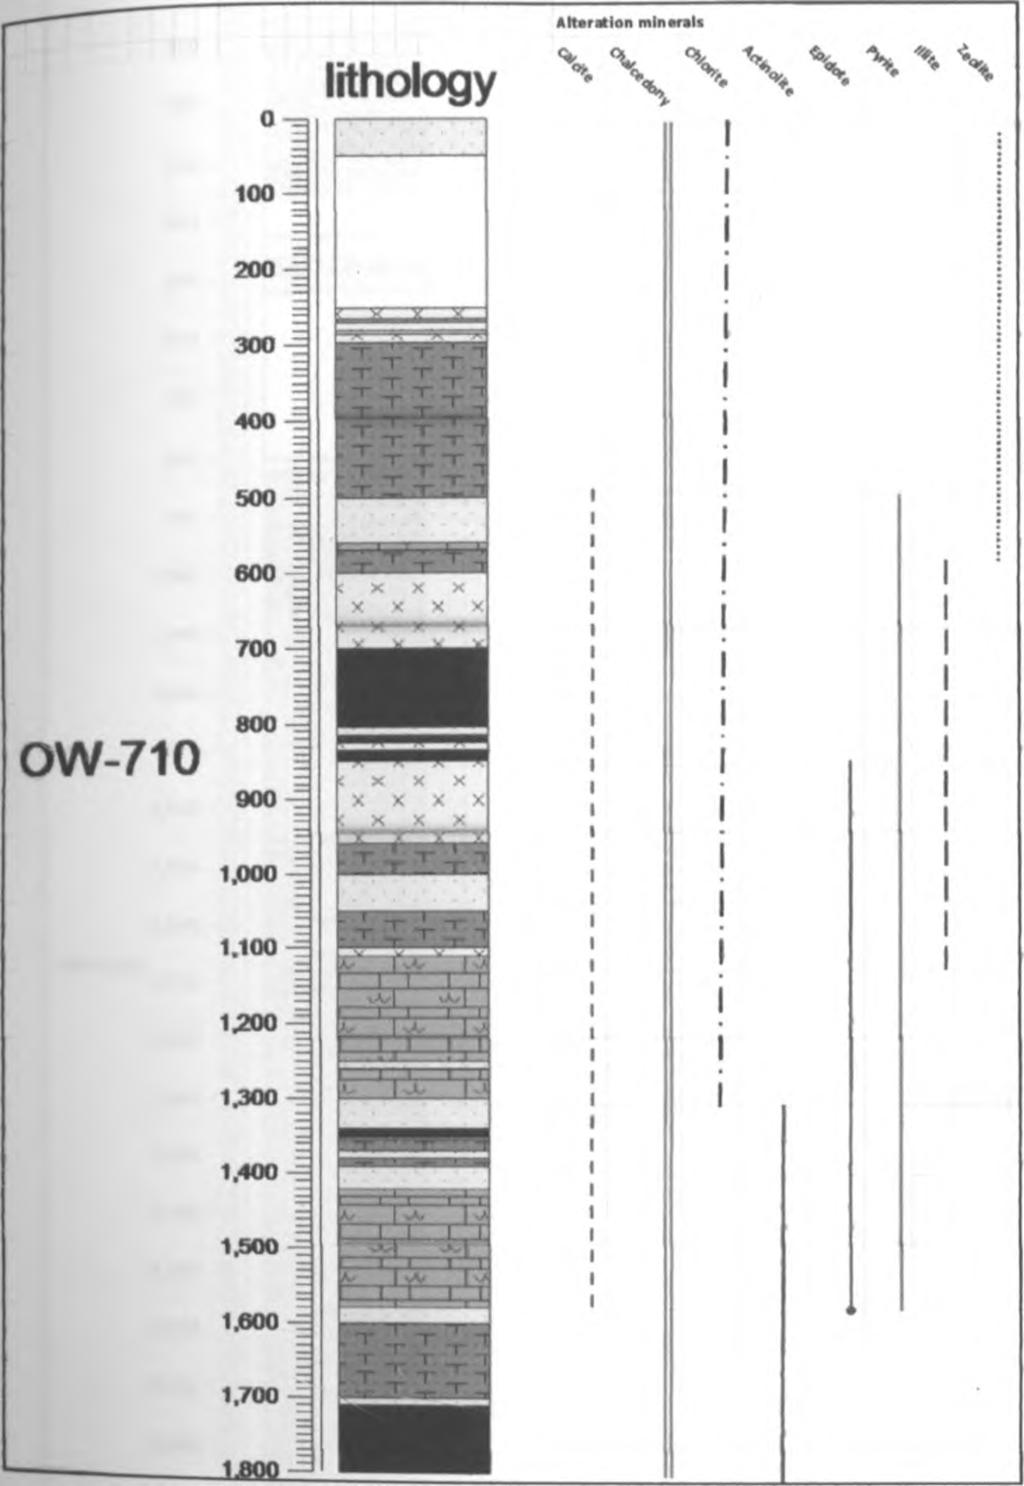 zonation in well OW-710